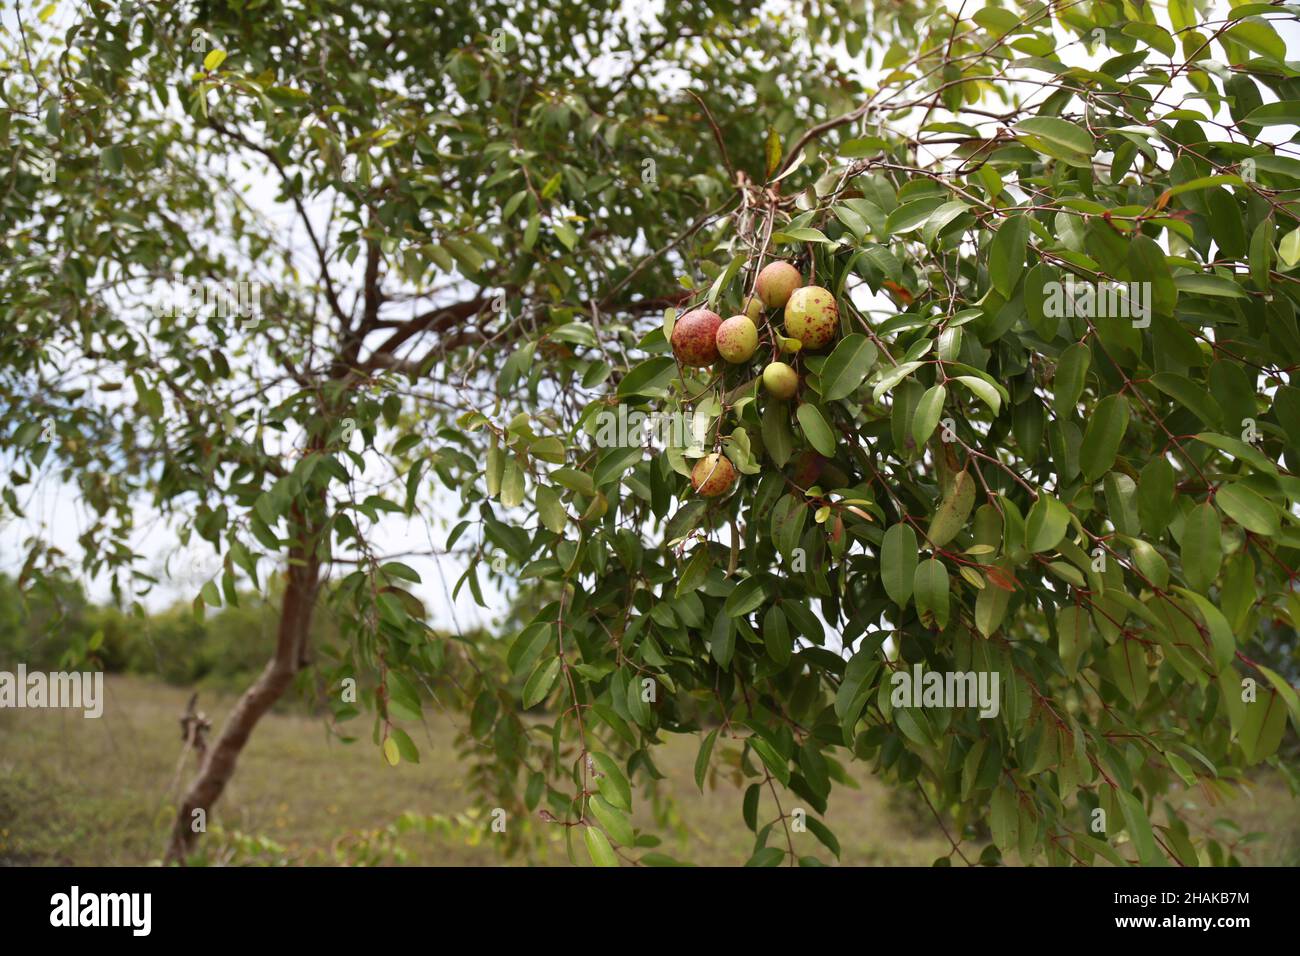 conde, bahia, brazil - march, 2015: Mangaba fruit on a mangaba tree in a plantation in the city of Conde. Stock Photo